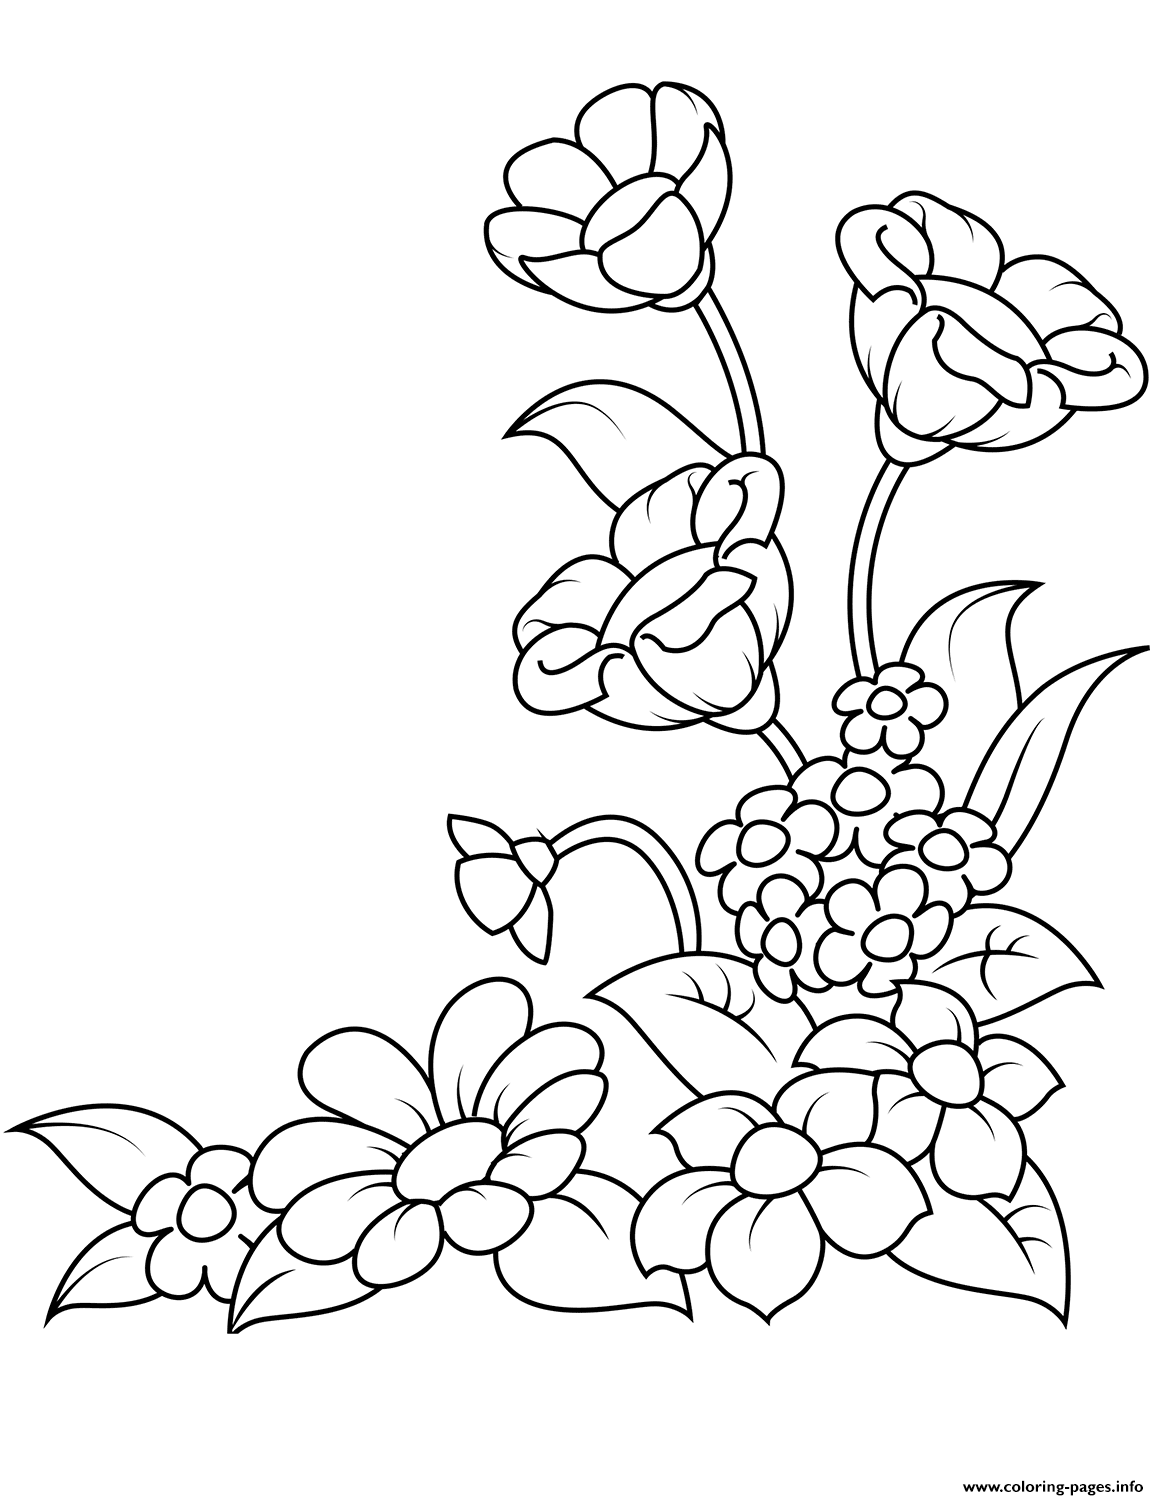 Printable Spring Flower Coloring Pages Coloring Home Spring Flowers Coloring Page Free 